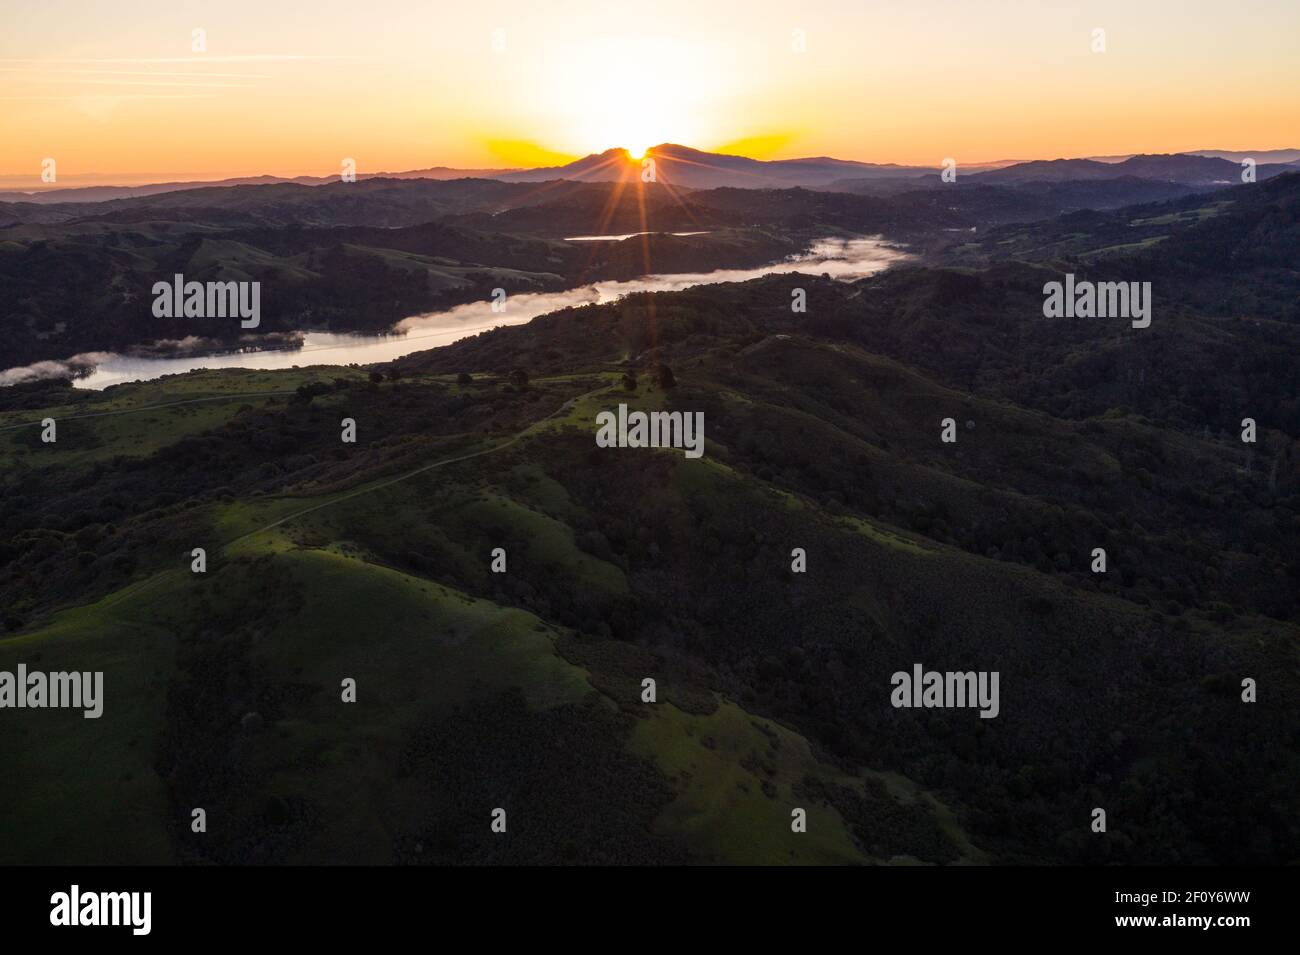 A brilliant sunrise greets the hills of the East Bay, not far from San Francisco Bay in California. Stock Photo